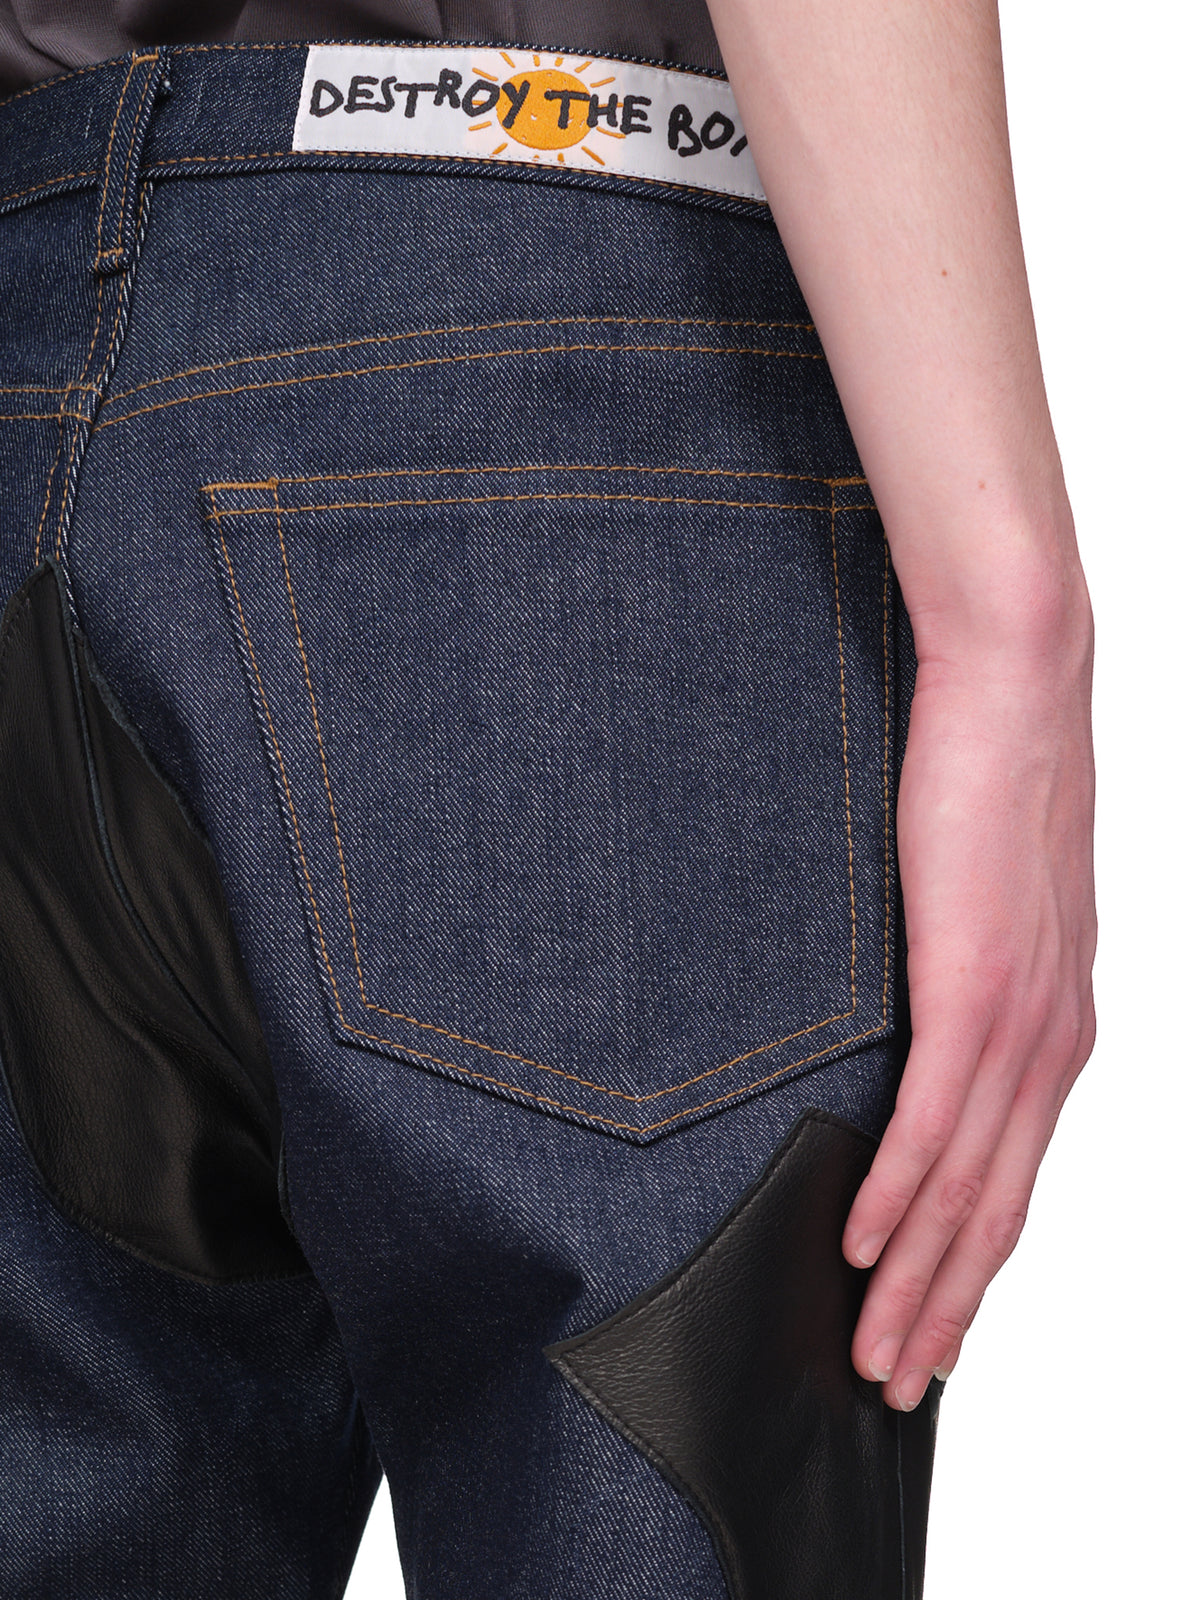 Destroy The Box Leather Accent Jeans | H. Lorenzo - detail 